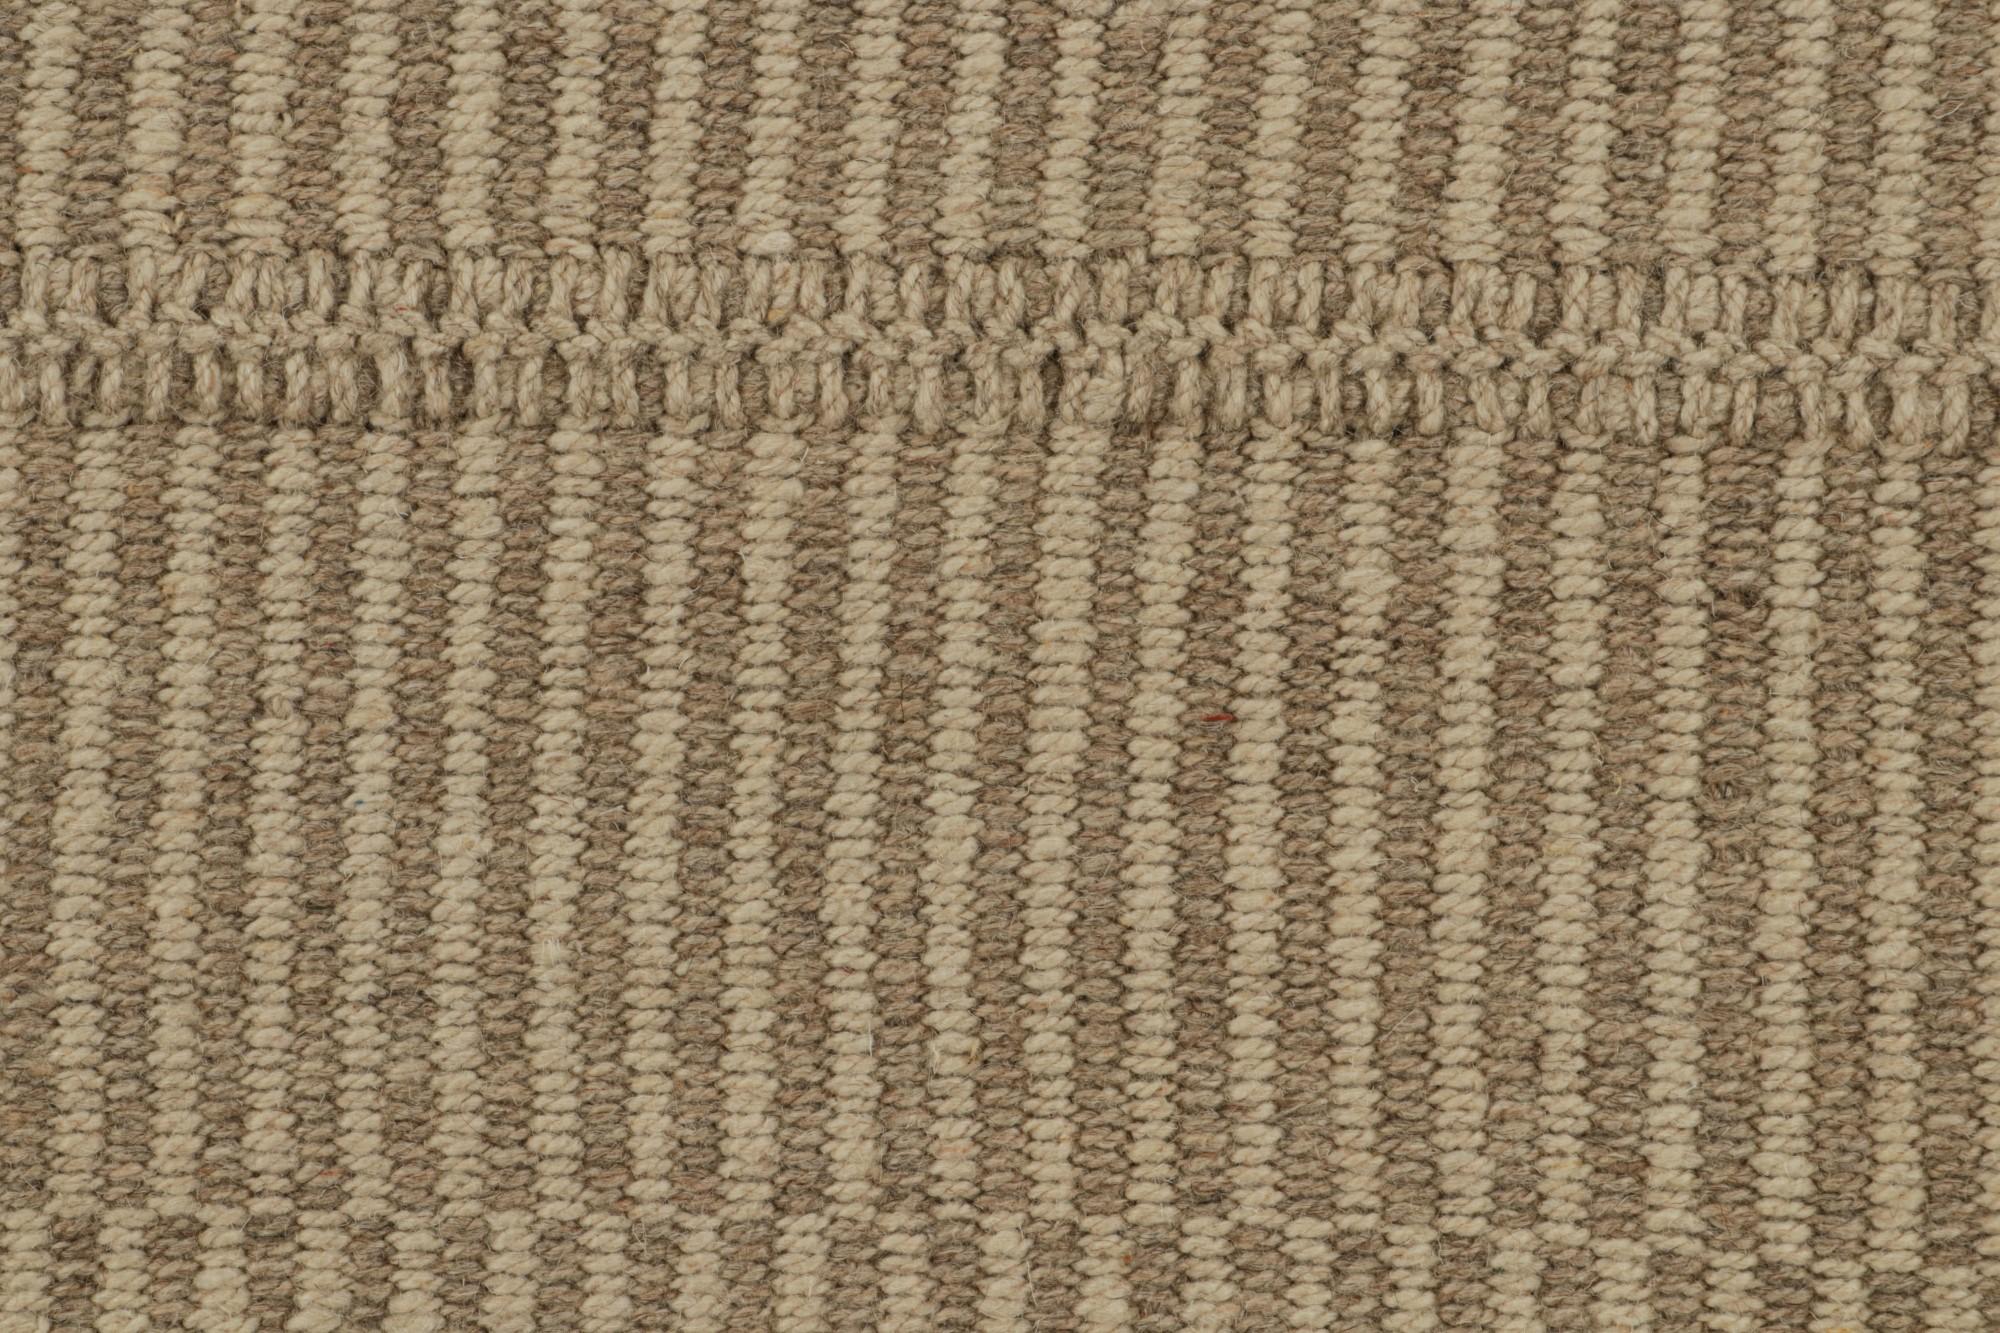 Rug & Kilim’s Contemporary Kilim in Beige Stripes In New Condition For Sale In Long Island City, NY